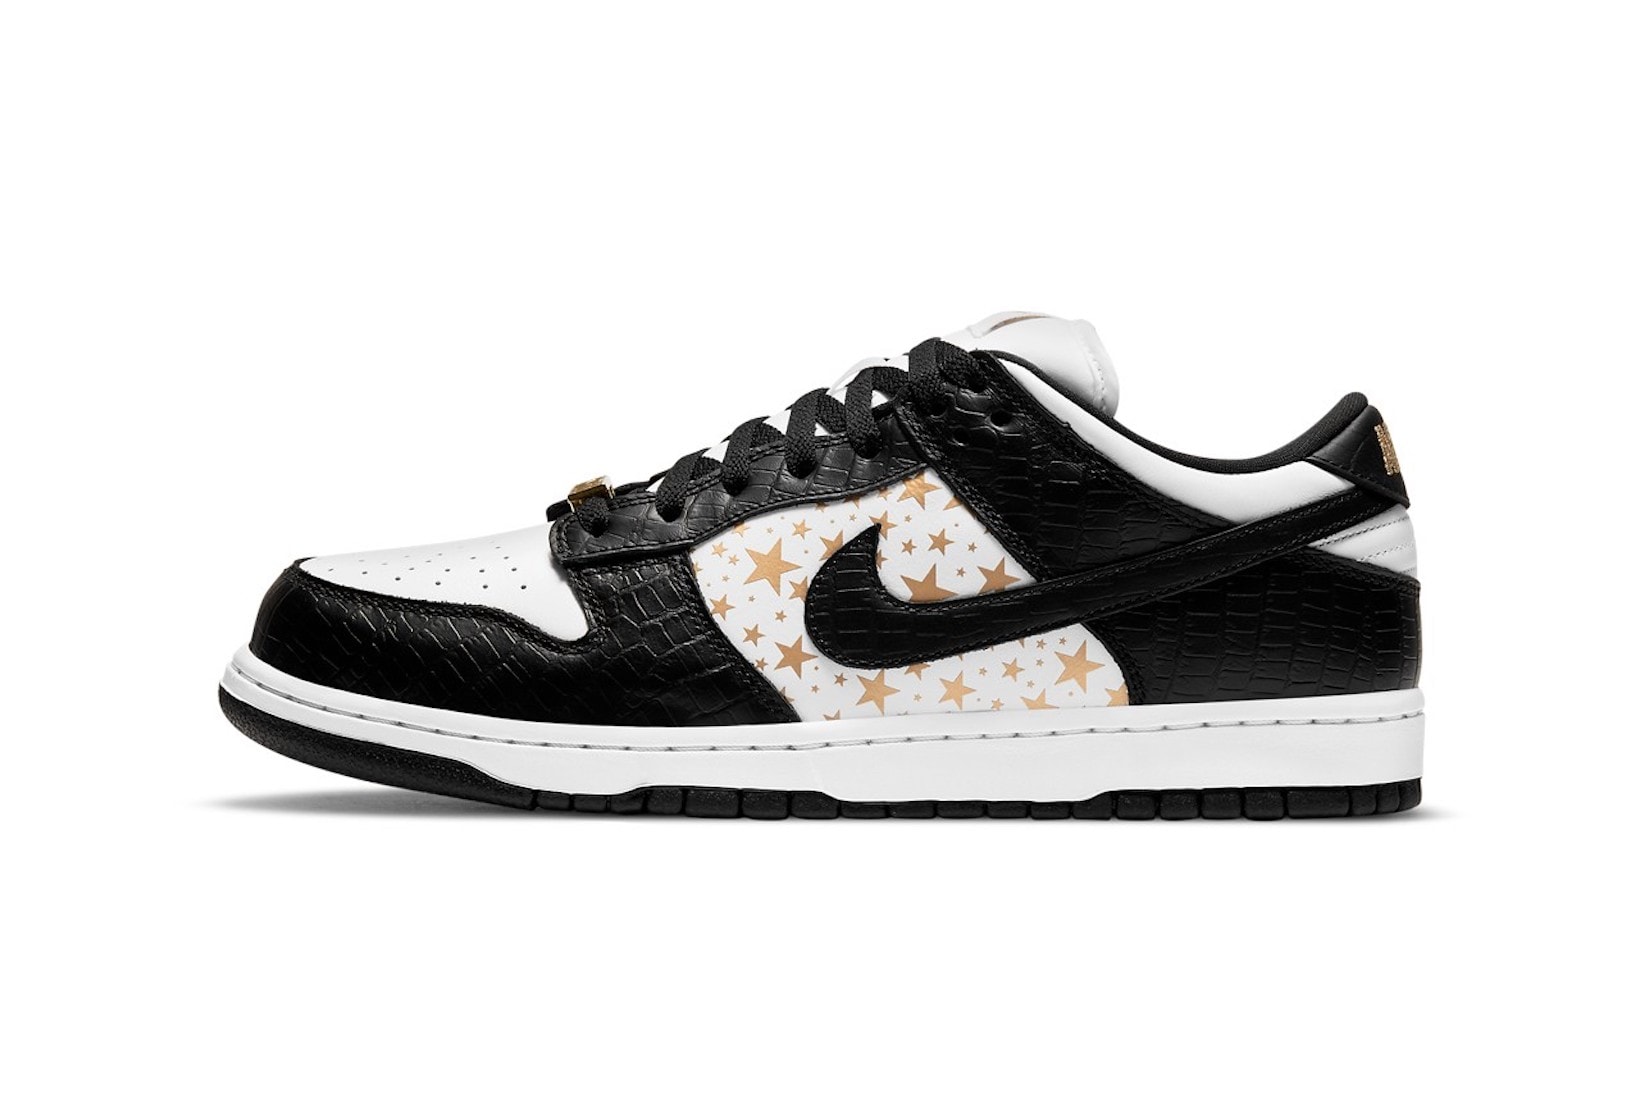 supreme nike sb dunk low collaboration sneakers black white colorway lateral gold stars laces